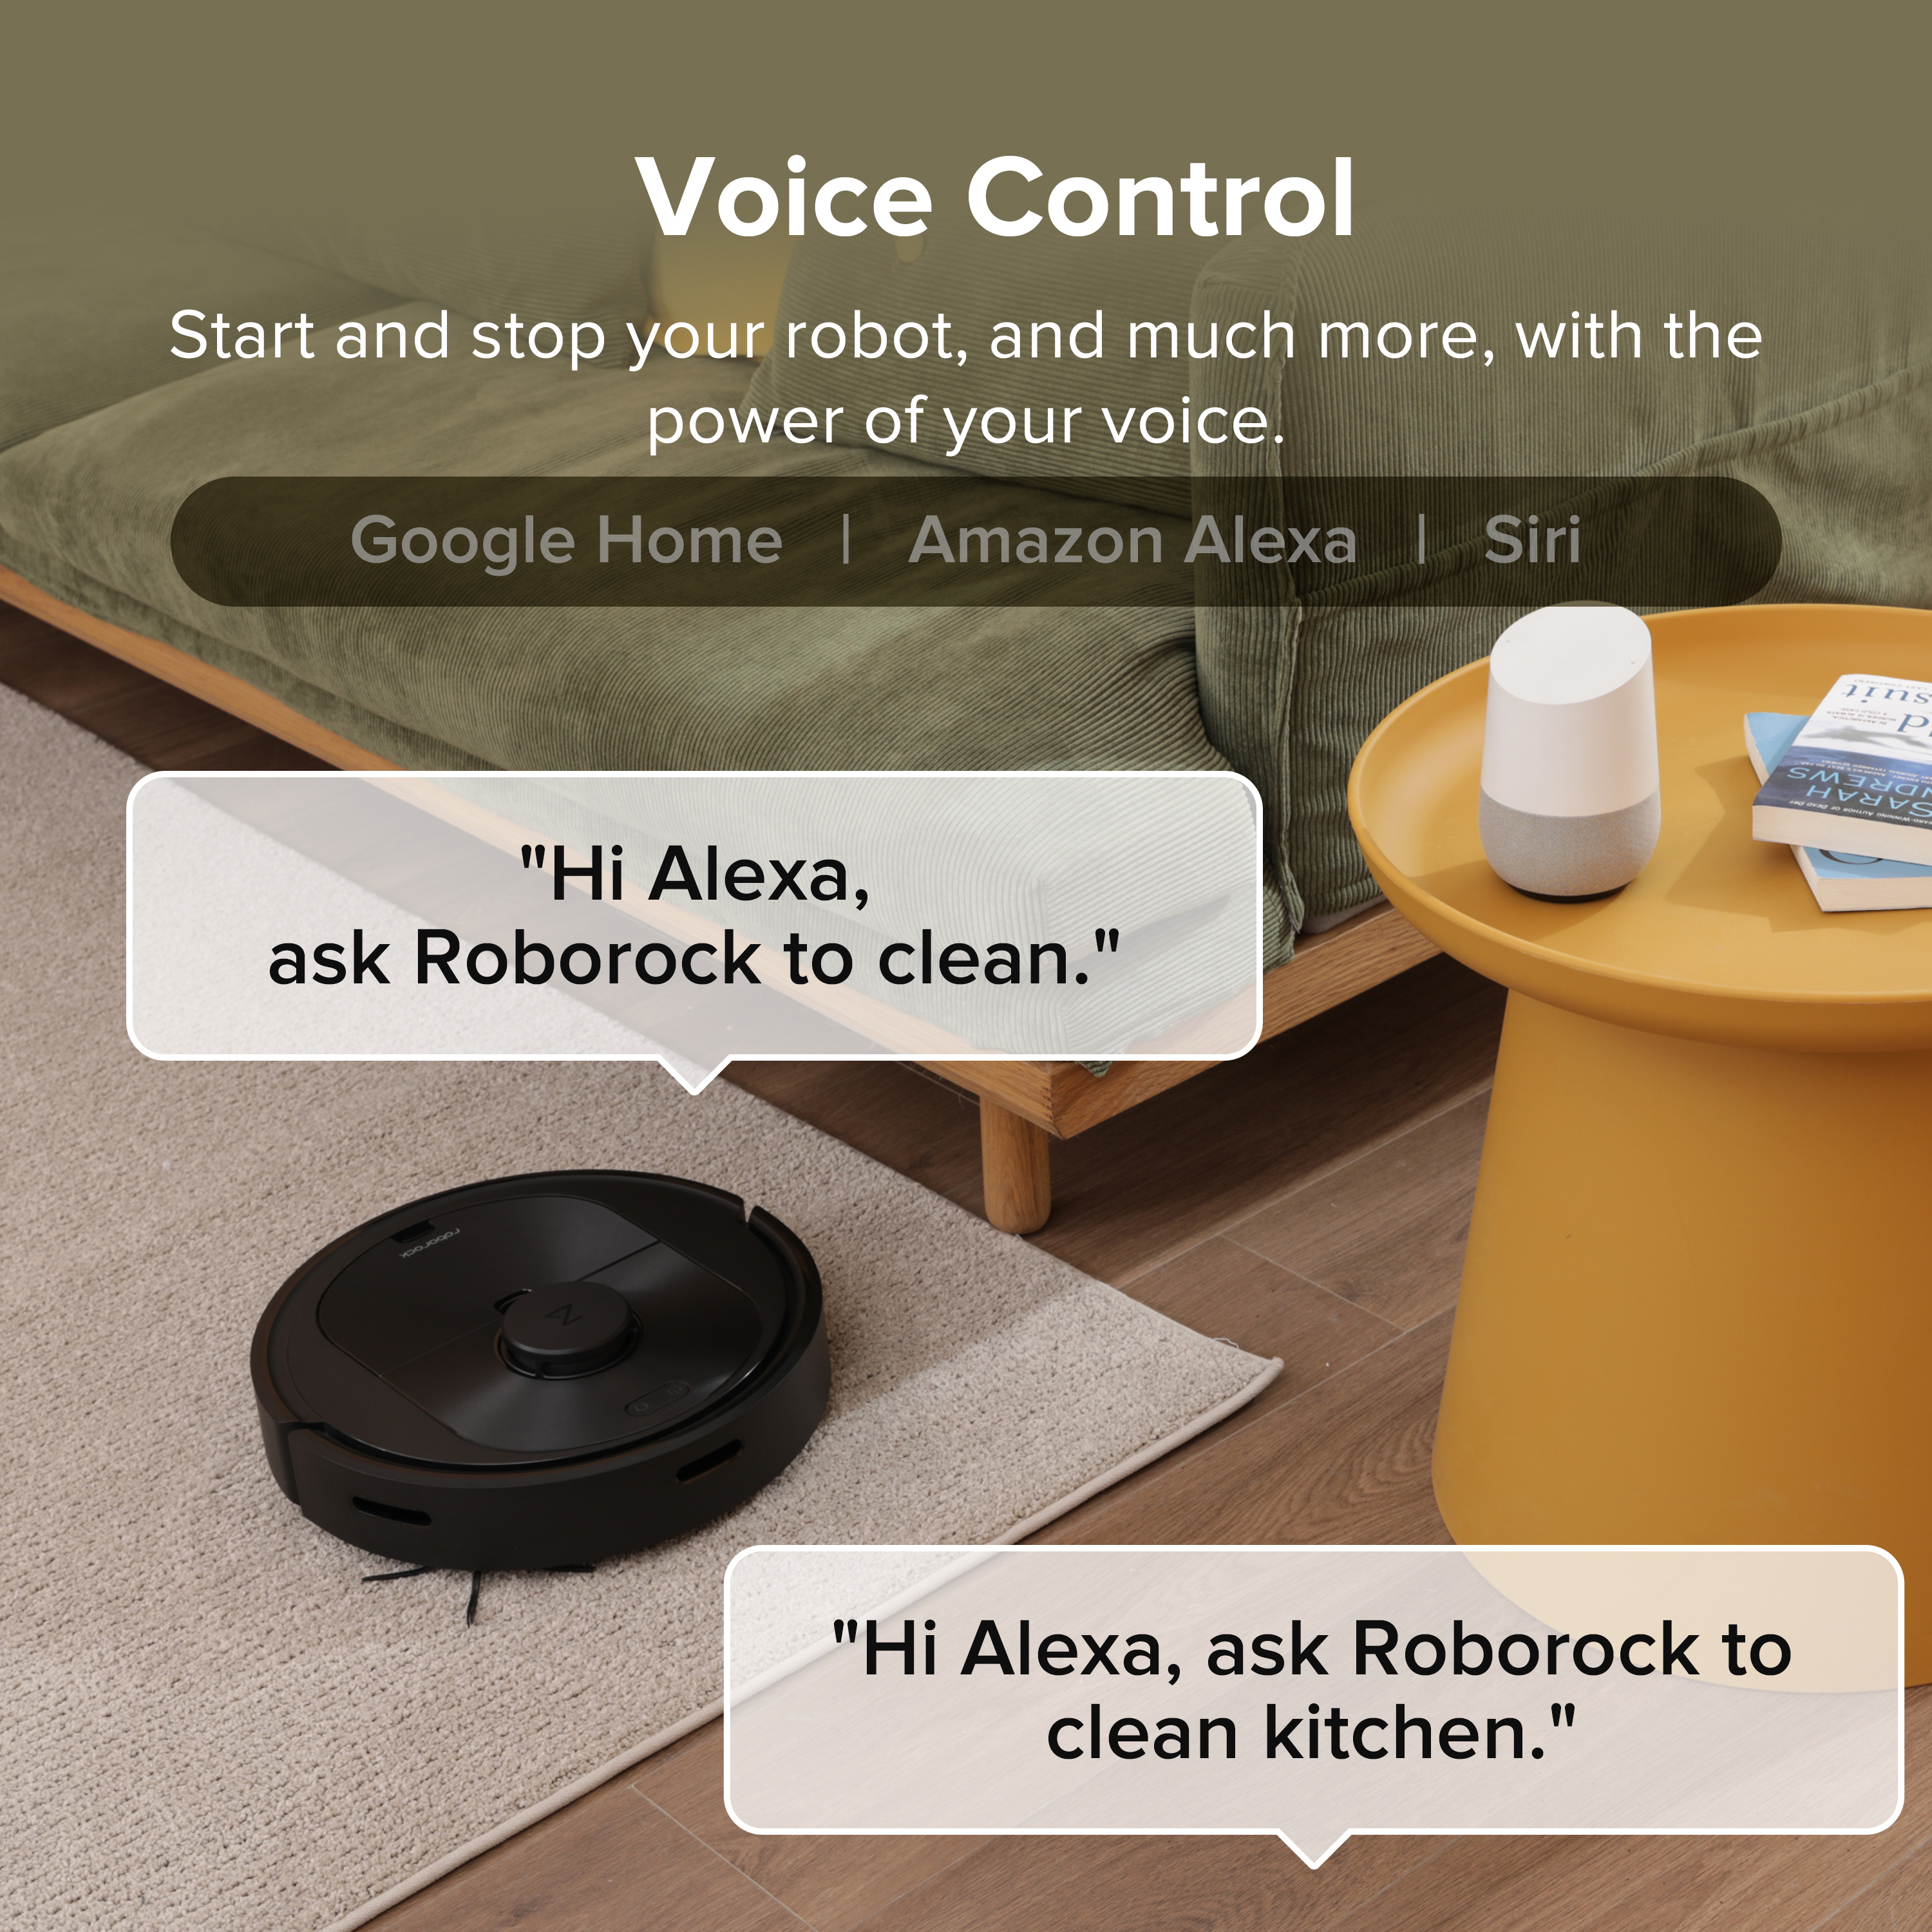 Roborock® Q5+ Auto Emptying Robot Vacuum Cleaner, 2700 Pa Suction Power, with App Control - image 13 of 15